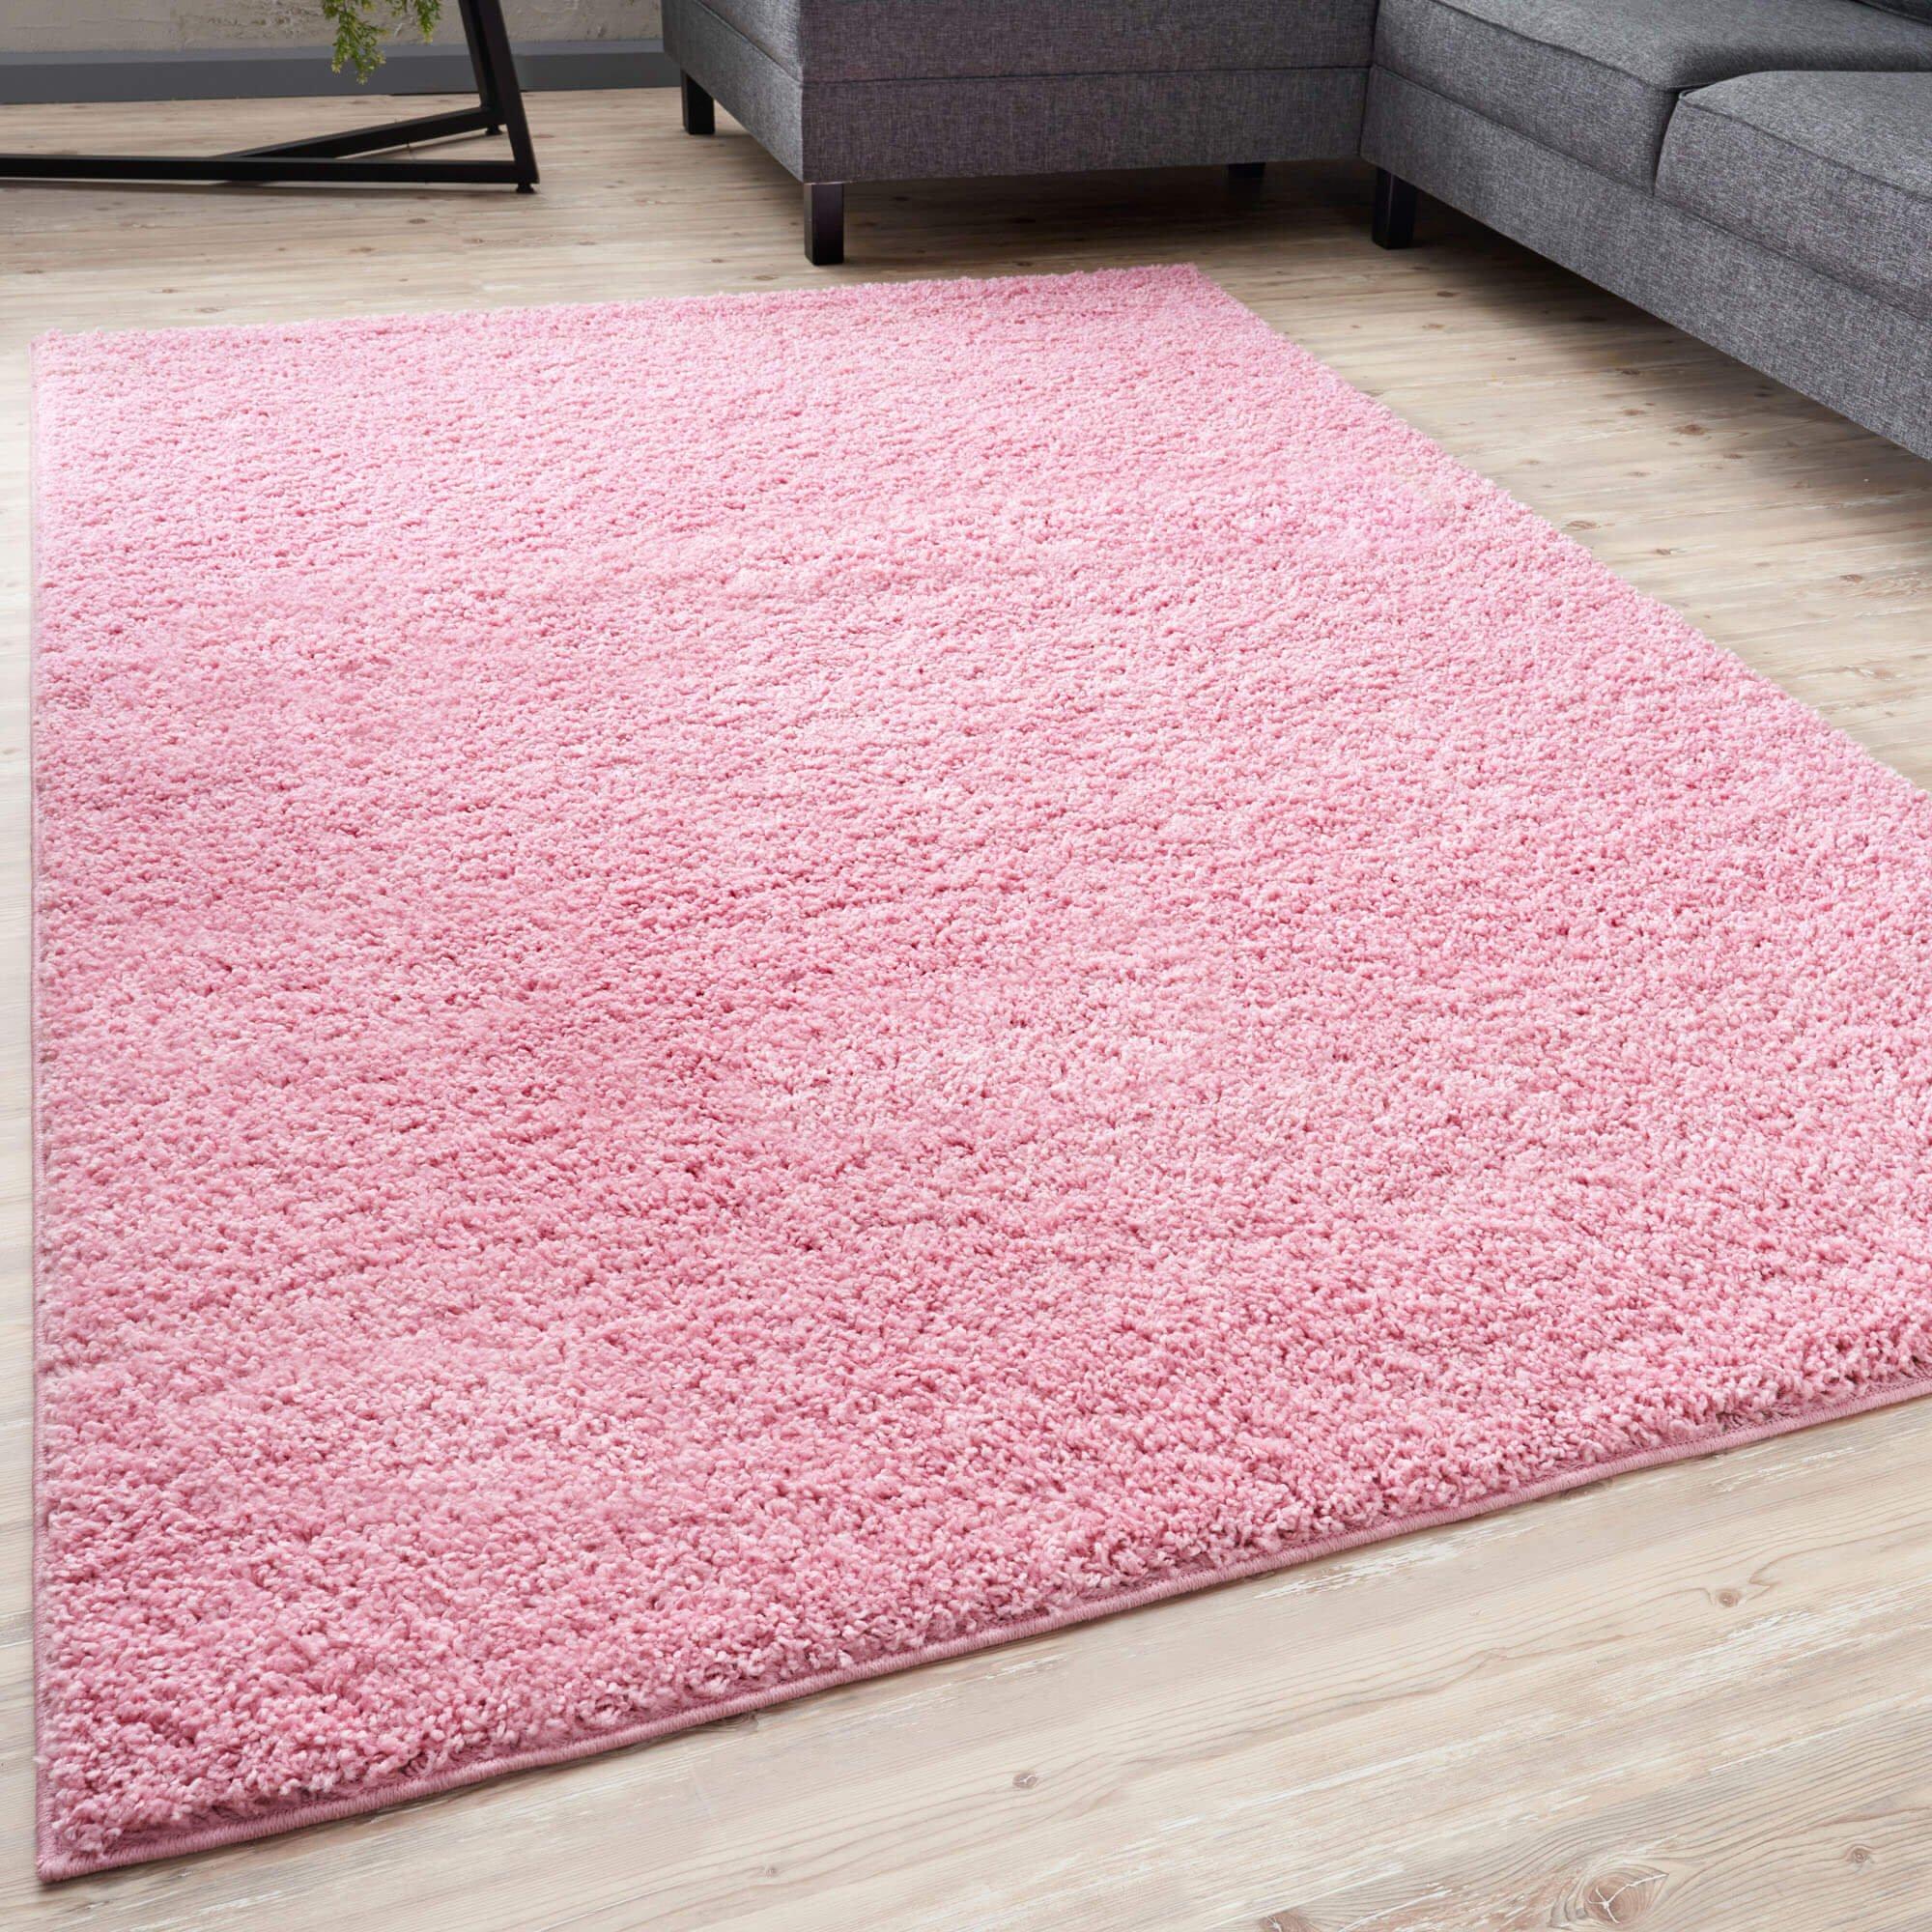 Myshaggy Collection Rugs Solid Design in Pink